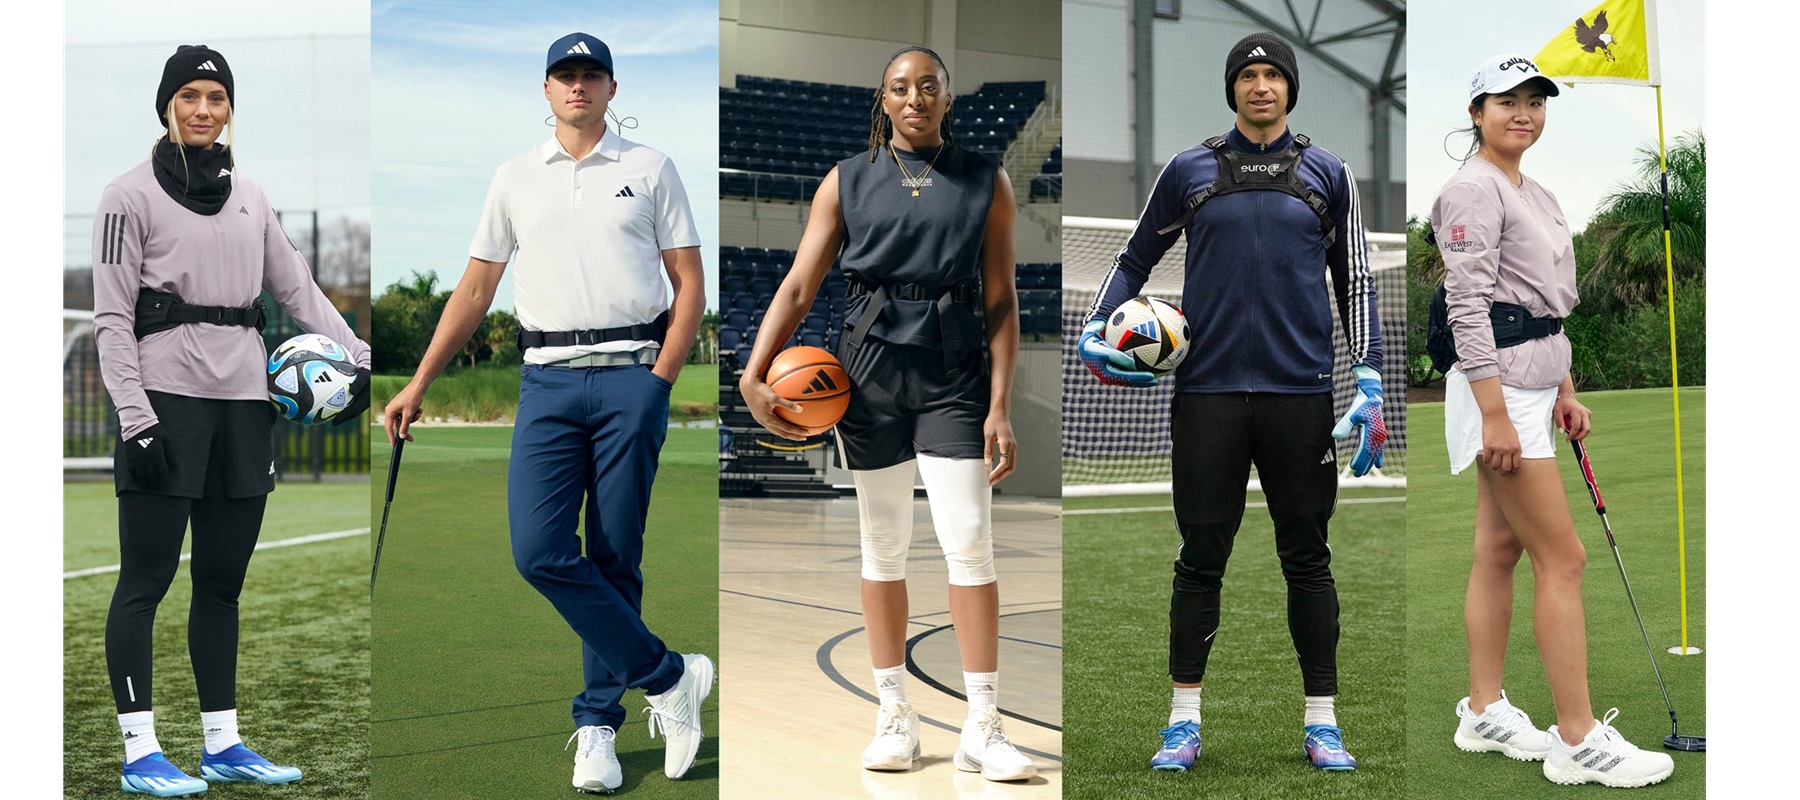 Adidas launches ‘You Got This’ campaign to help athletes overcome high pressure moments in sport